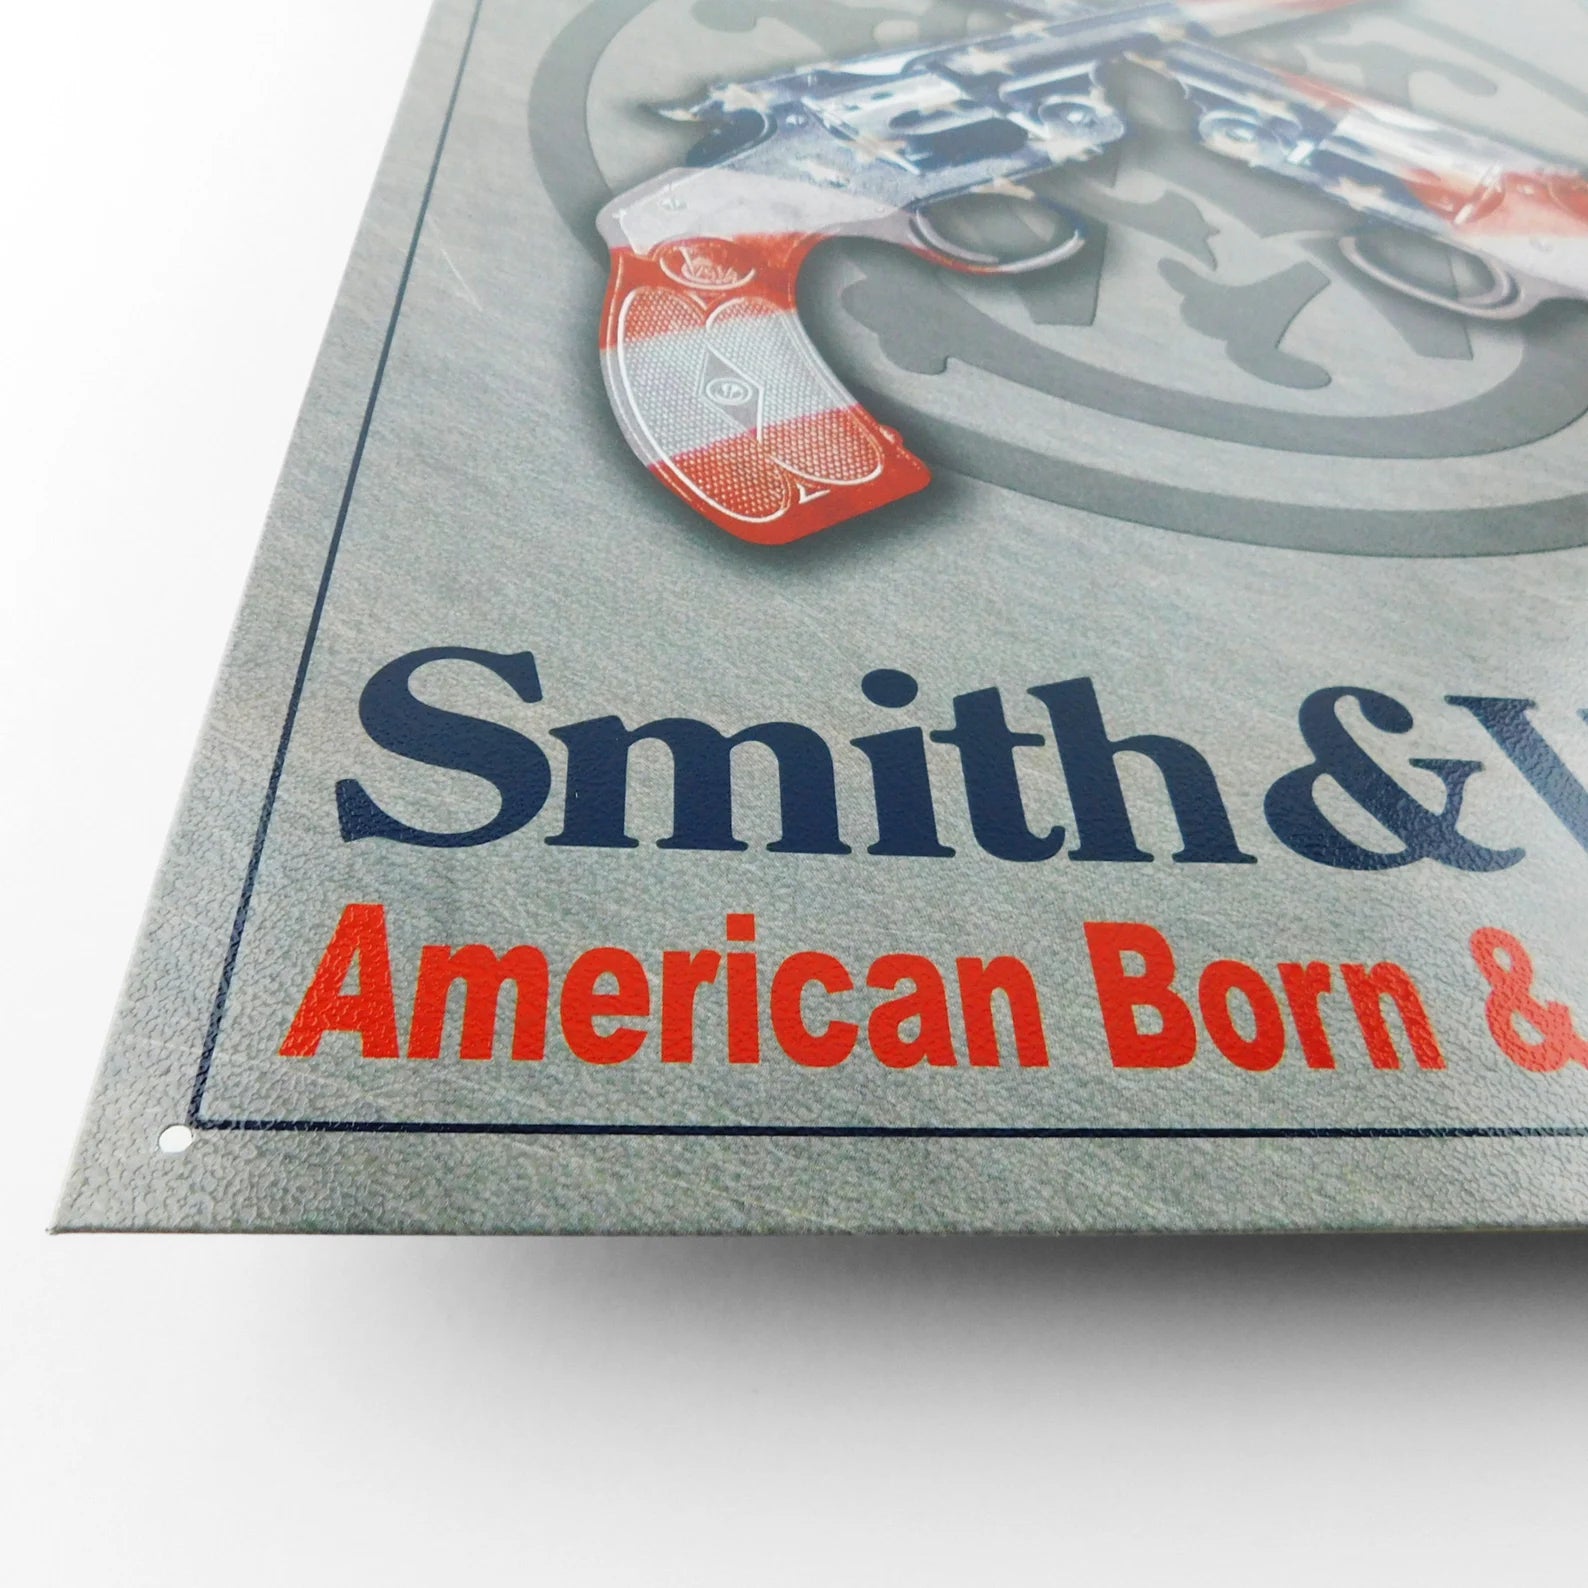 Smith & Wesson 'American Born and Bred' - Tin Metal Sign